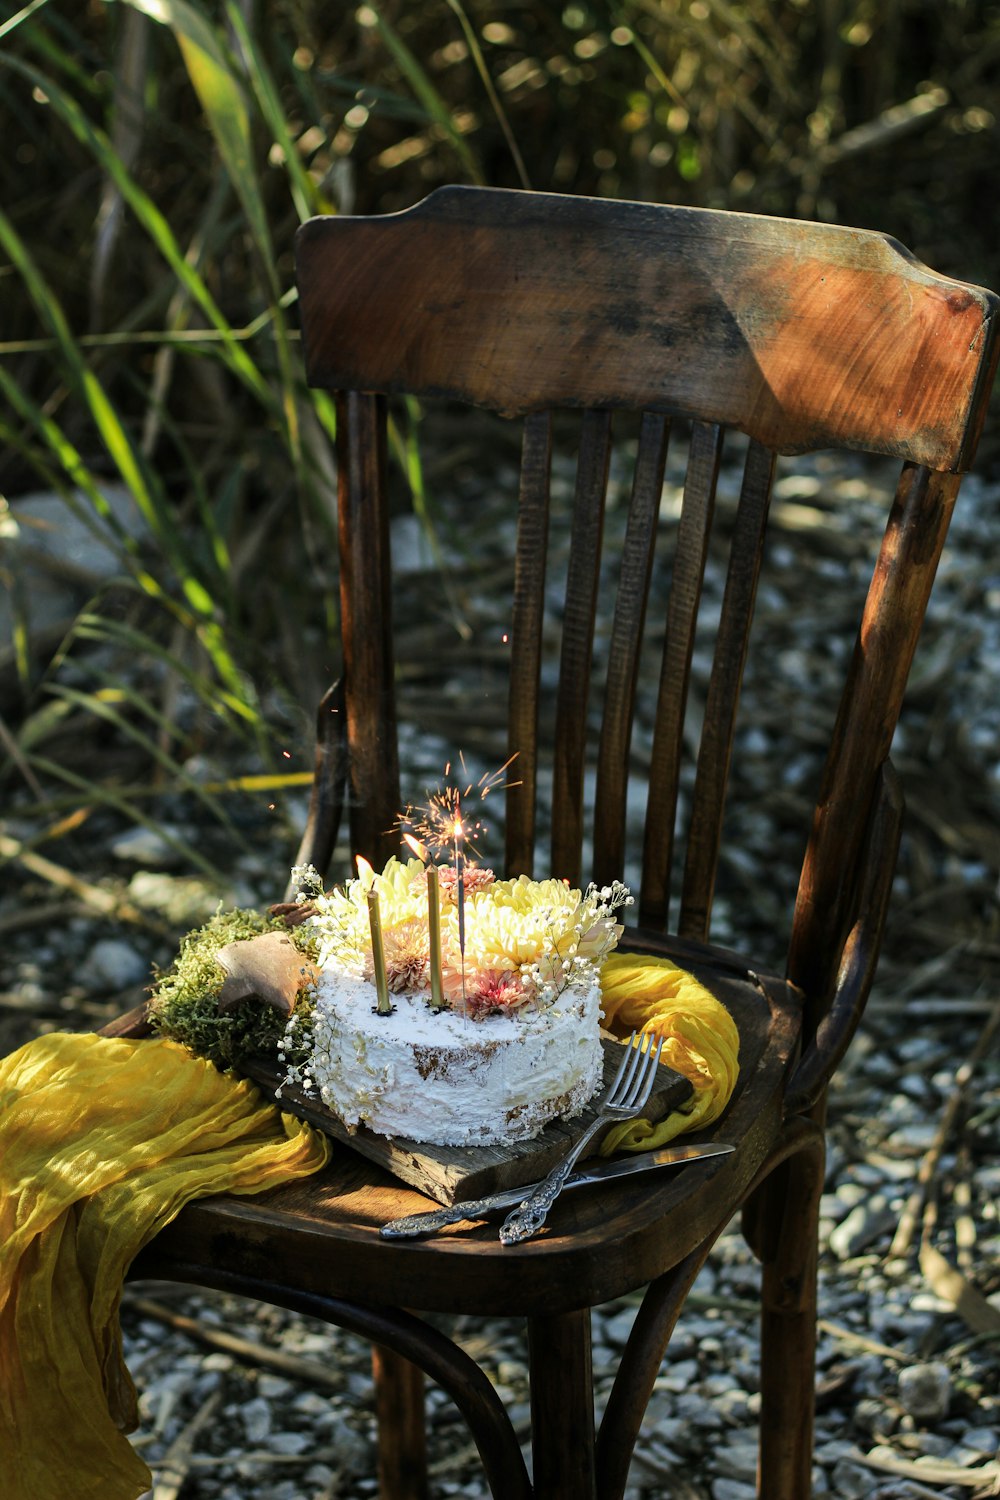 a birthday cake sitting on top of a wooden chair